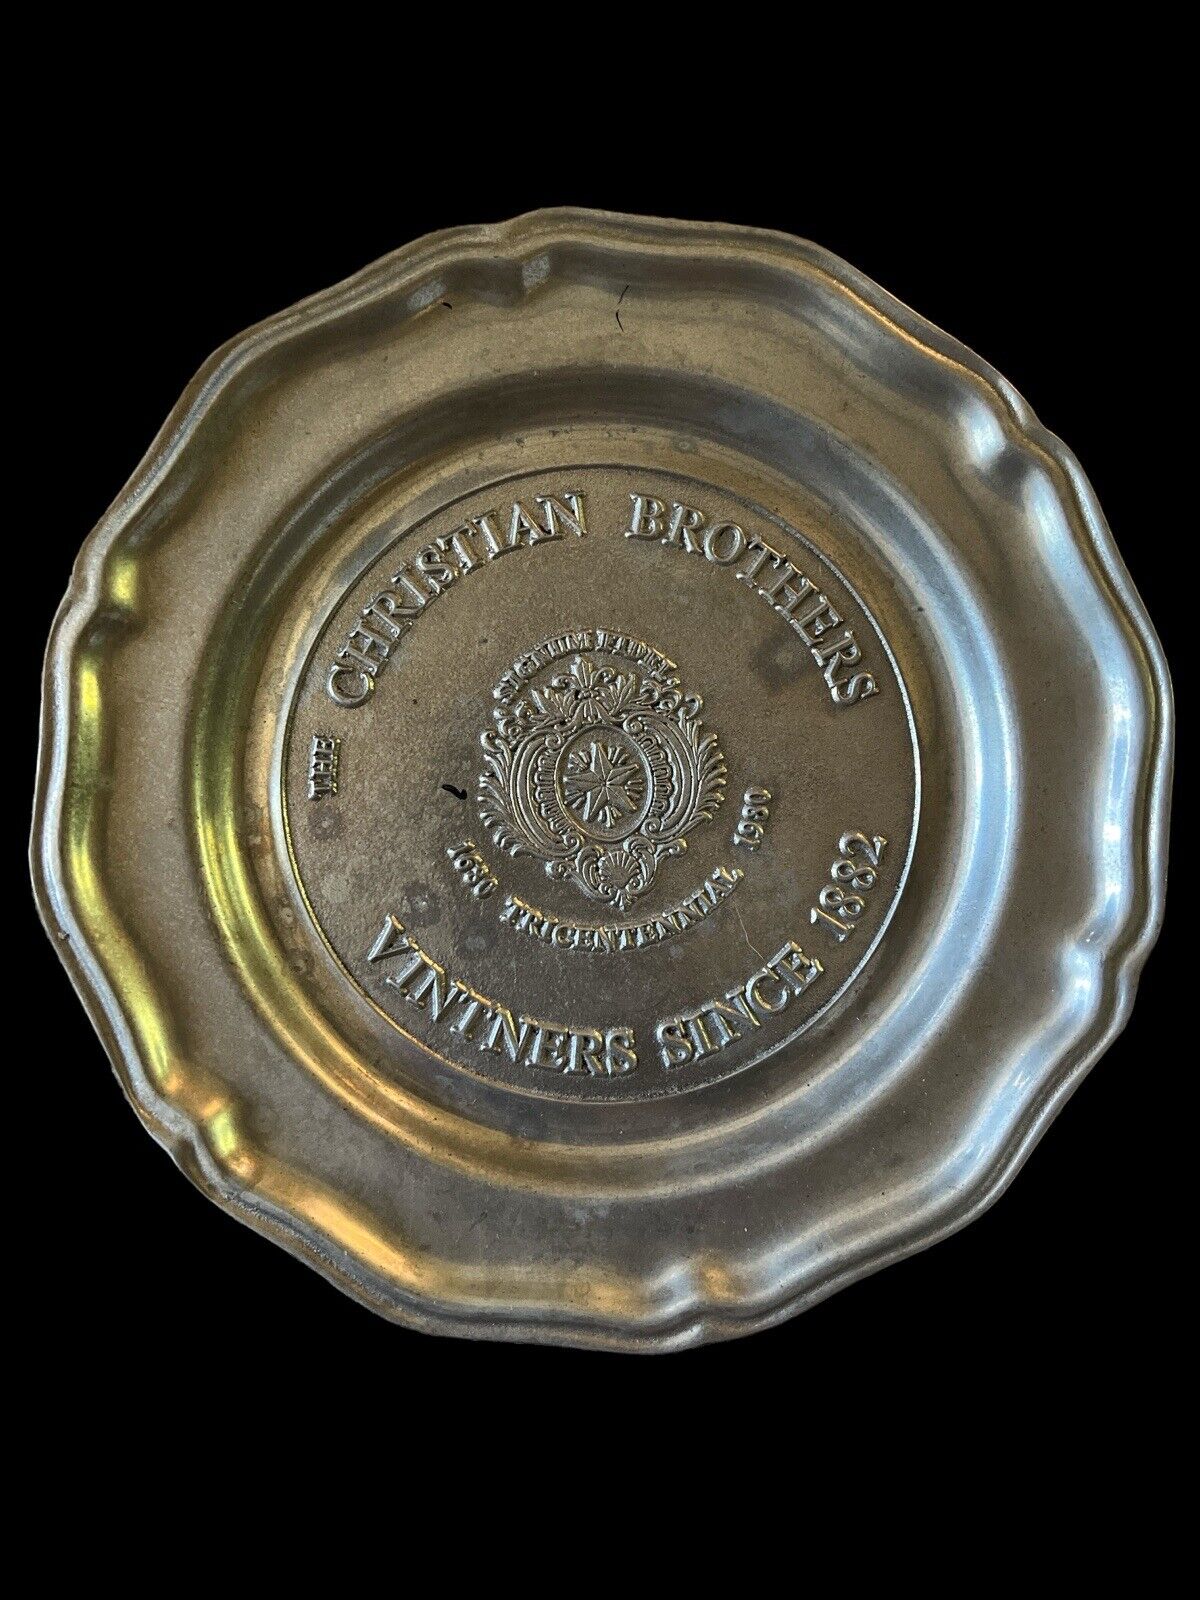 Wilton Christian Brothers Tricentennial Plate 1680-1980